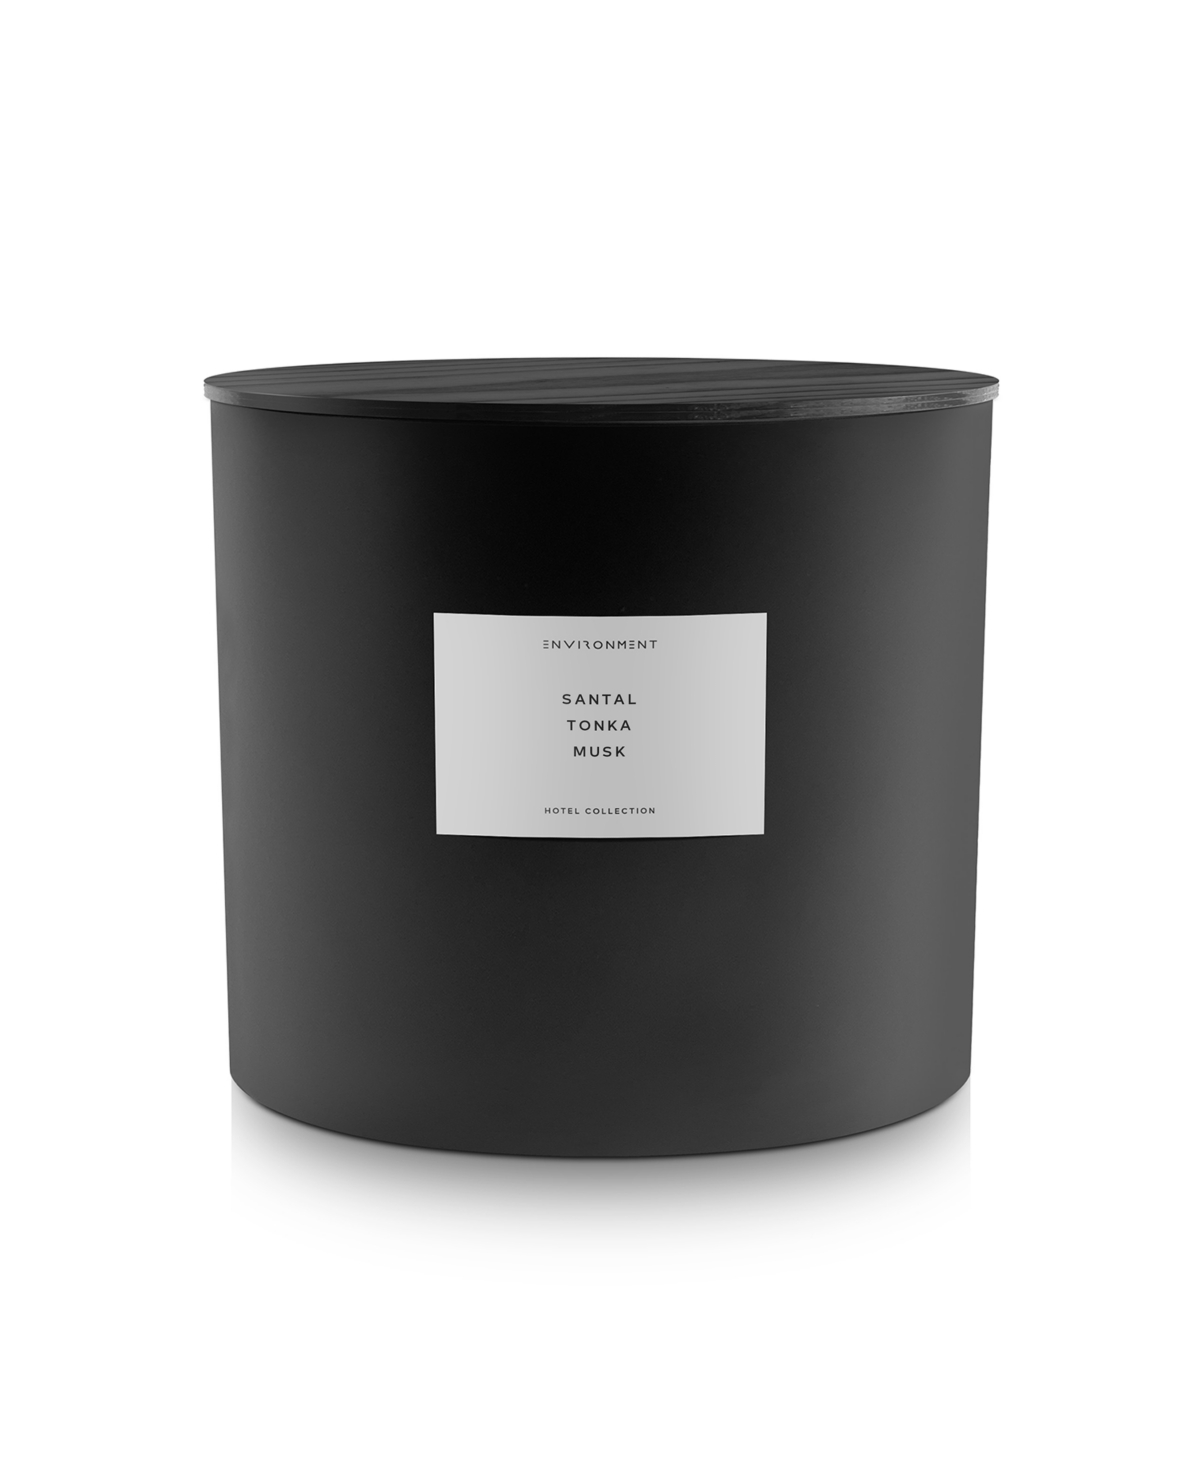 Santal, Tonka, & Musk Candle (Inspired by 5-Star Hotels), 55 oz.